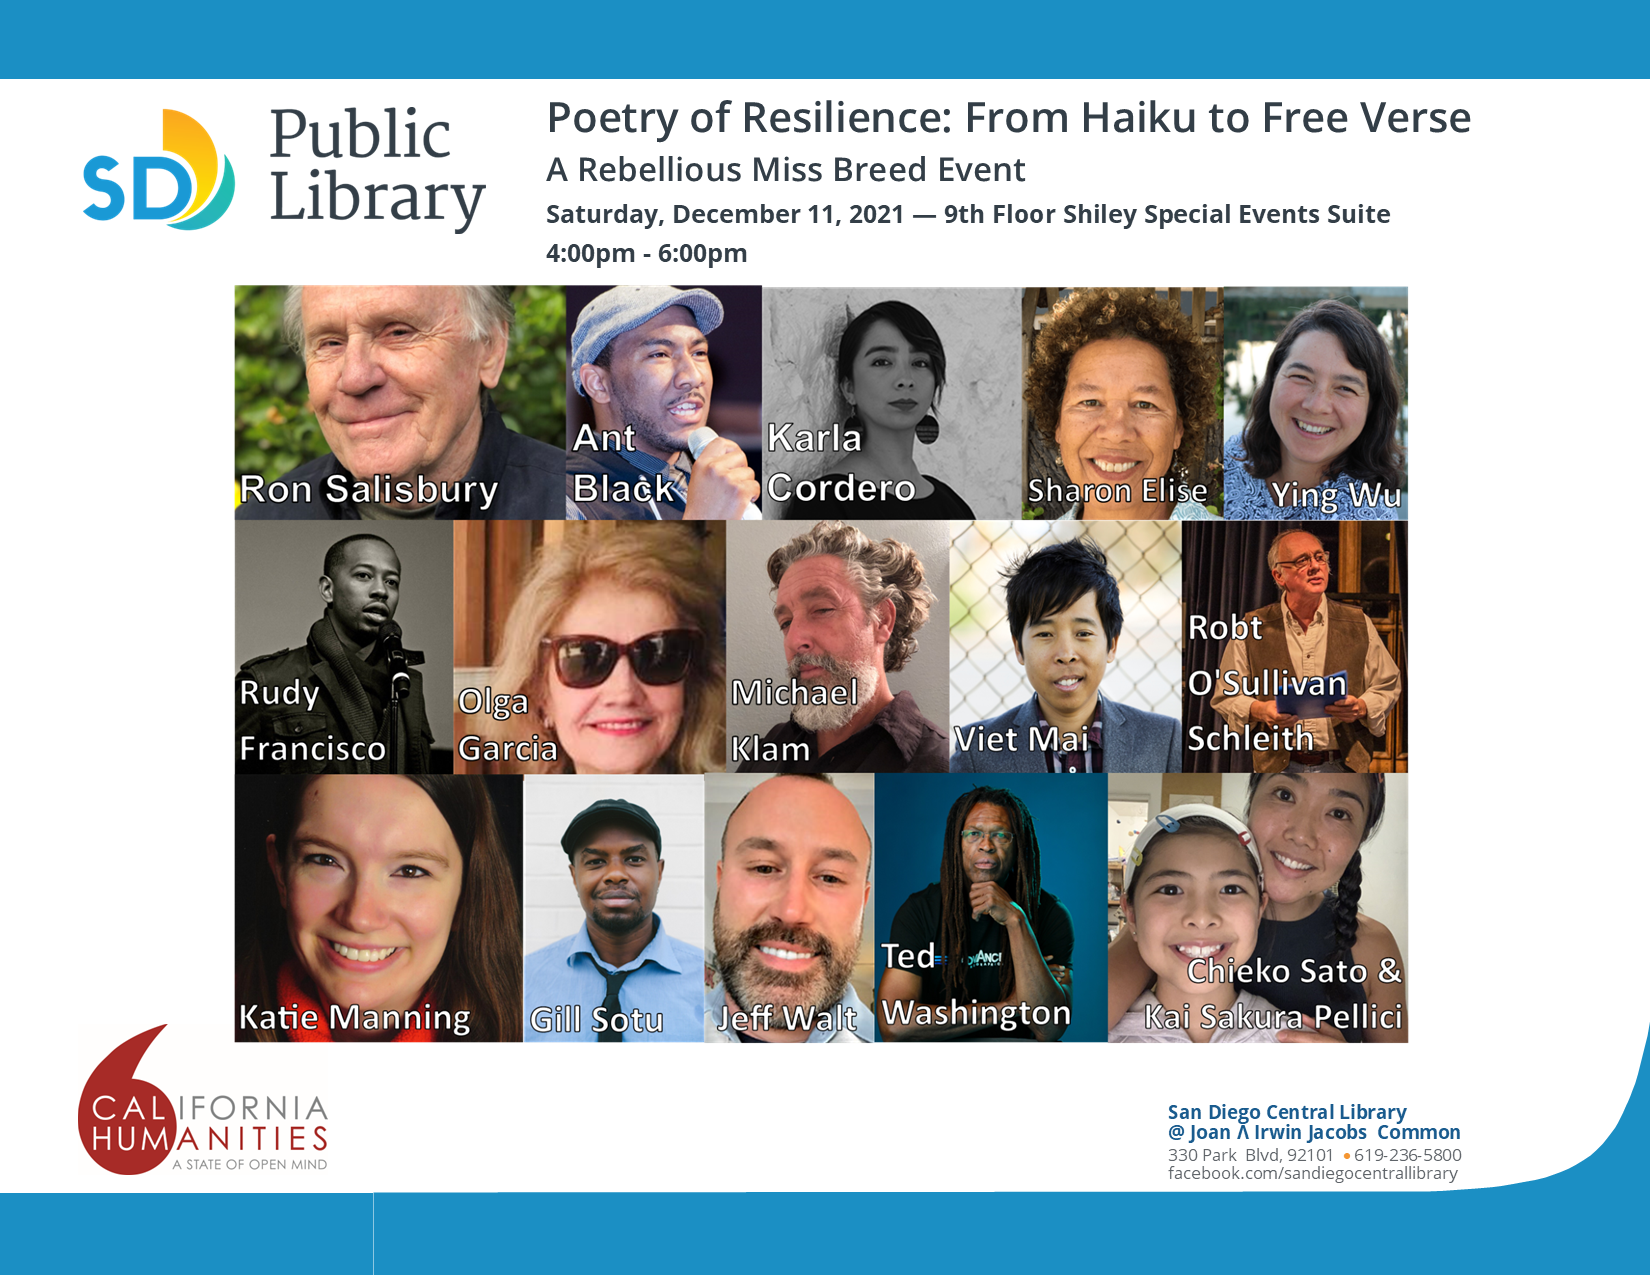 Photo collage of 15 local poets